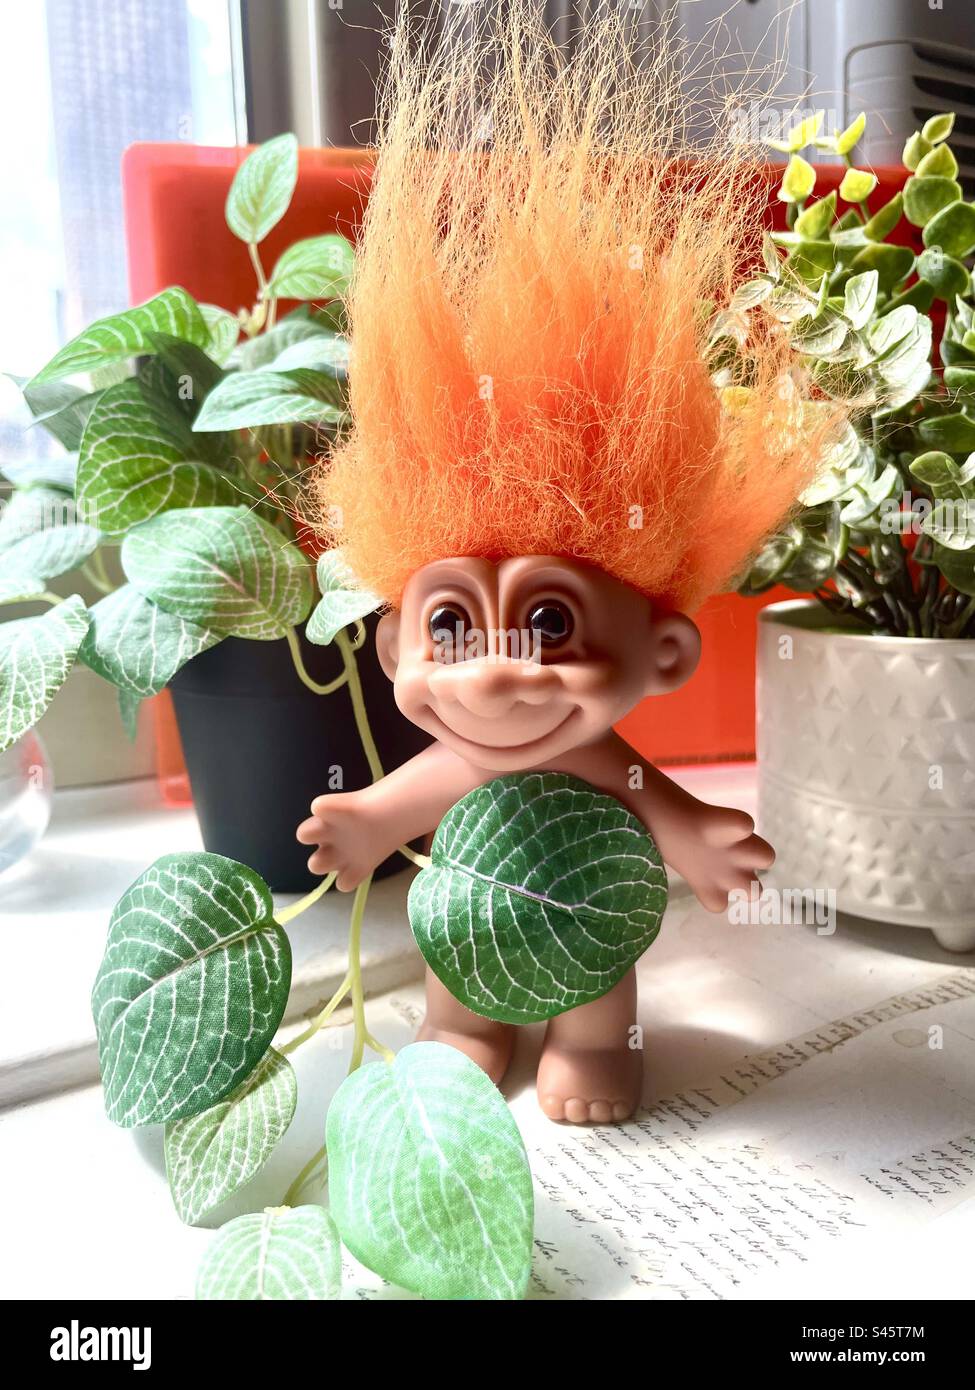 orange-haired troll doll among potted plants Stock Photo